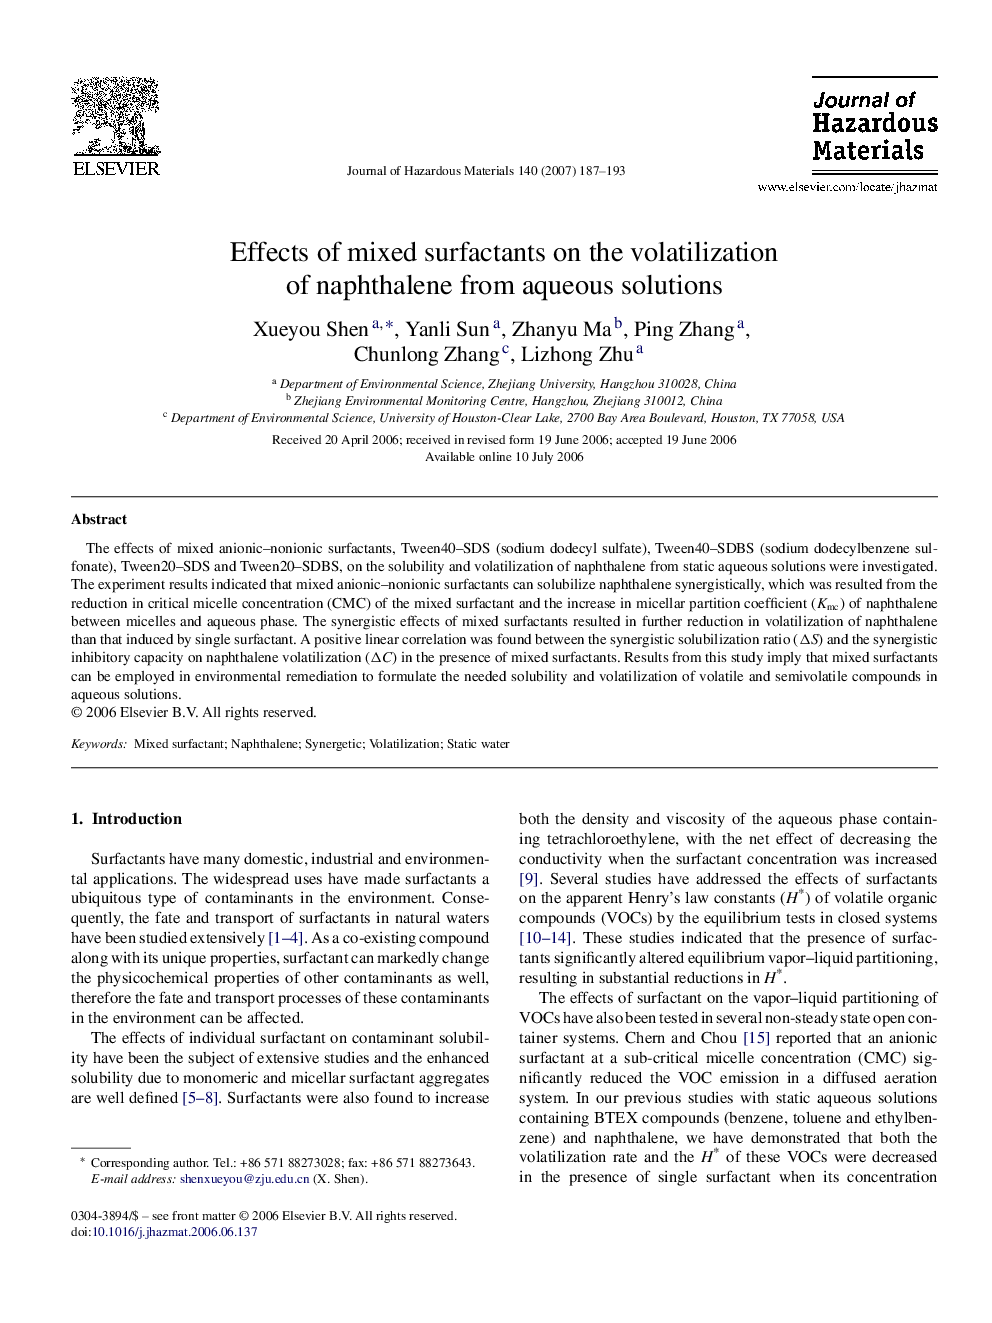 Effects of mixed surfactants on the volatilization of naphthalene from aqueous solutions